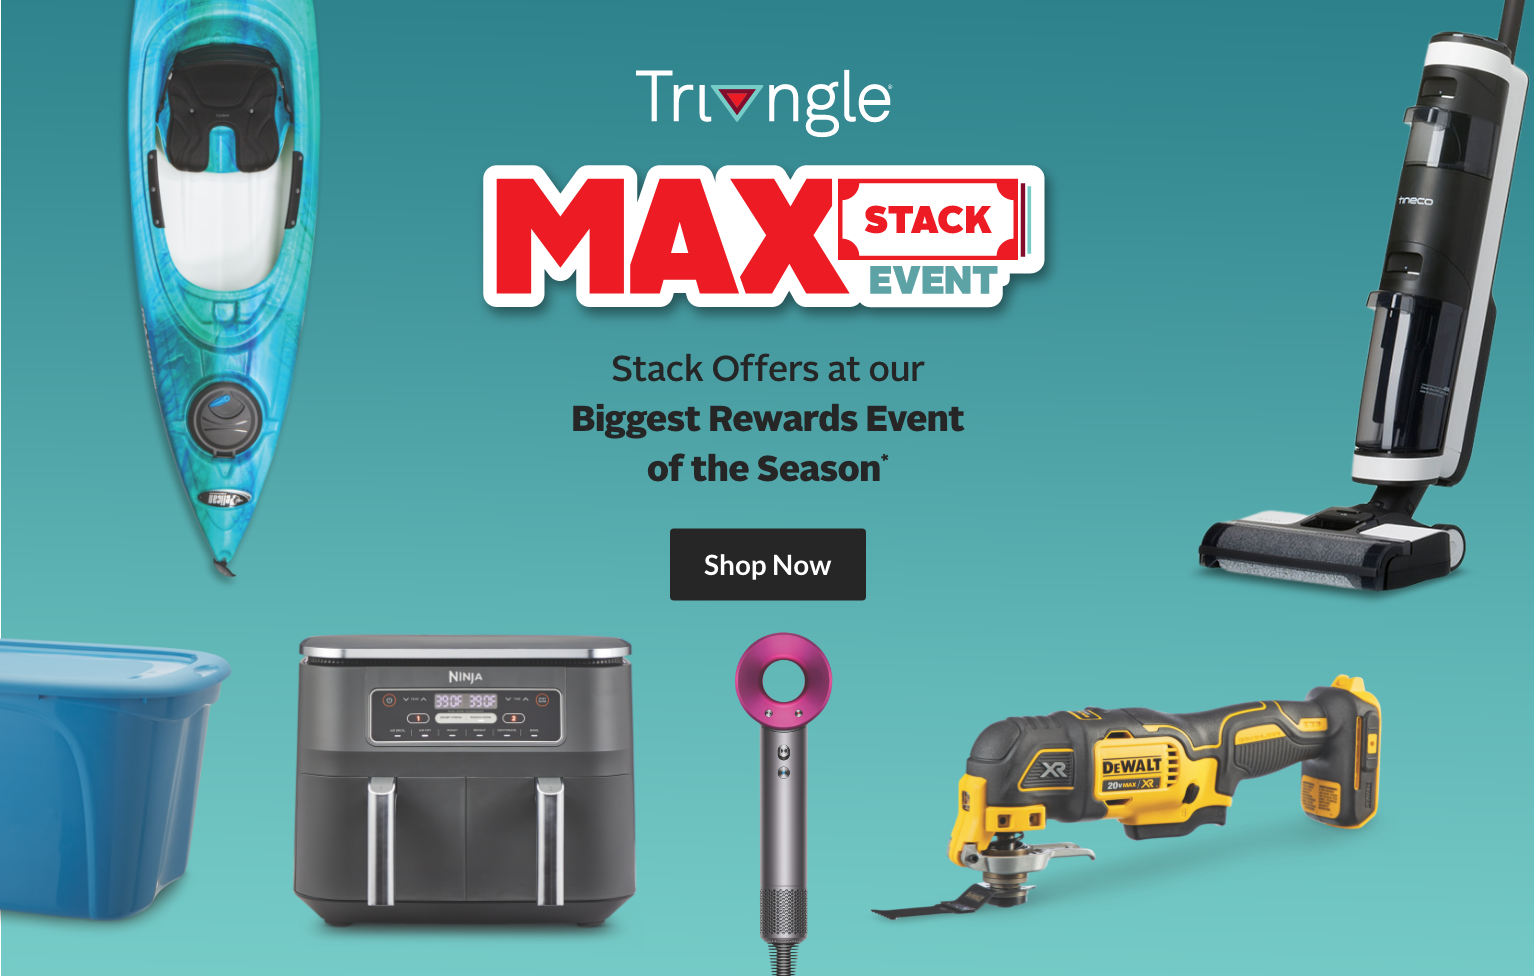 Various products including tools, a kayak, appliances and patio furniture around a “Triangle Max Stack Event” title.